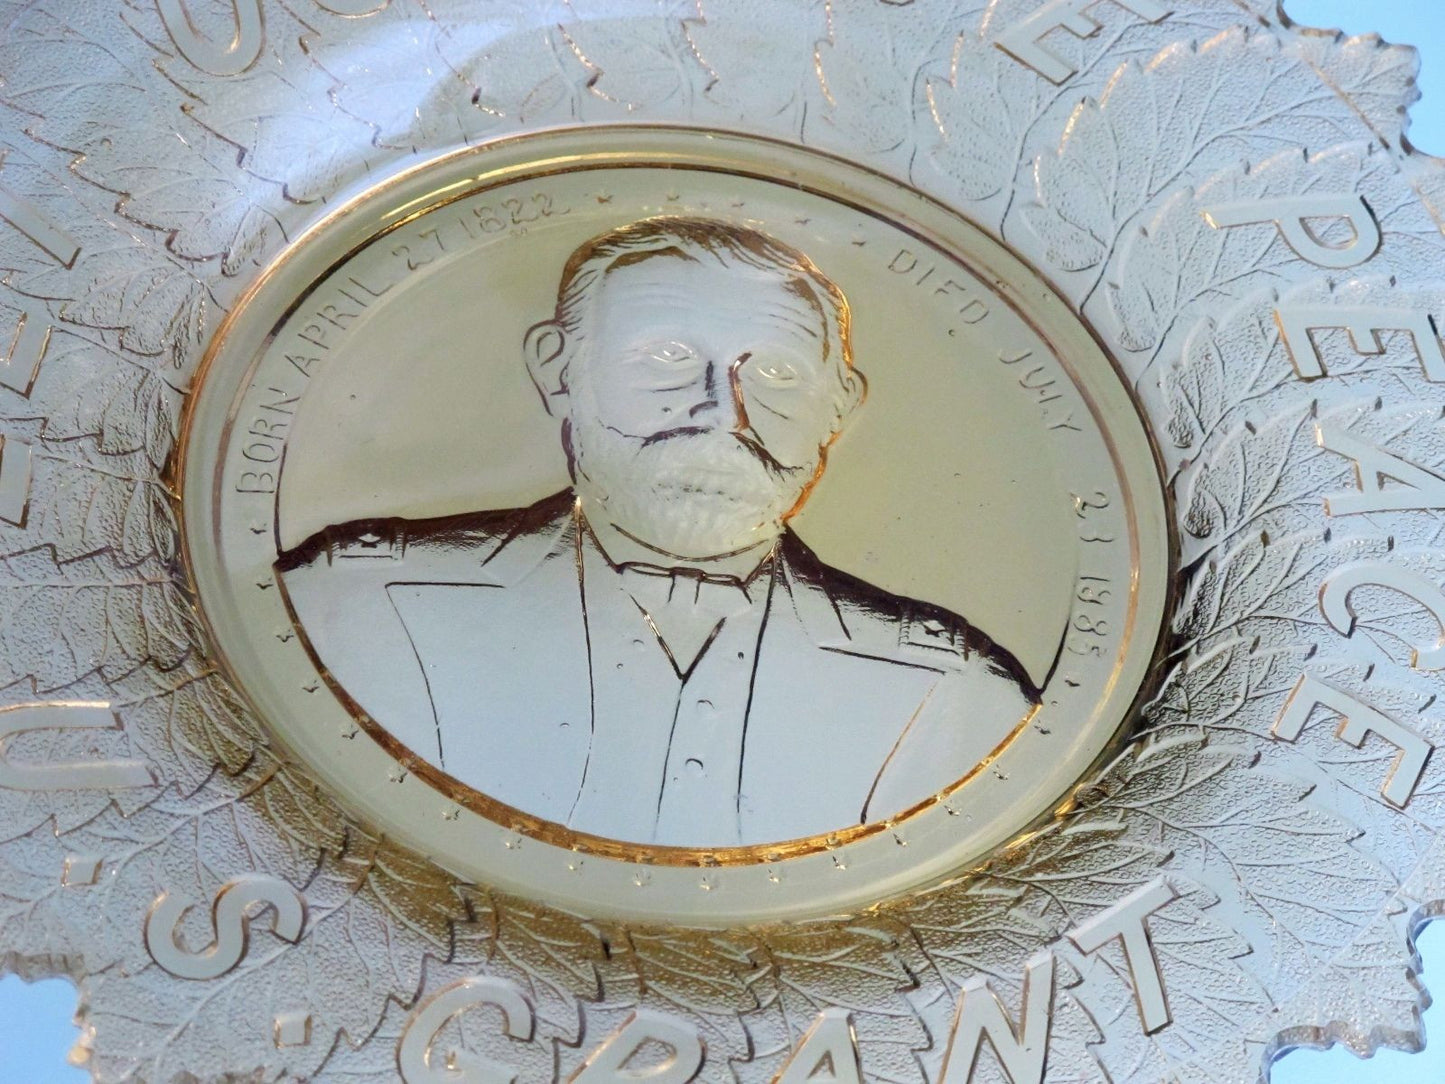 S.Grant amber "LET US HAVE PEACE" GLASS PLATE - O'Rourke crystal awards & gifts abp cut glass